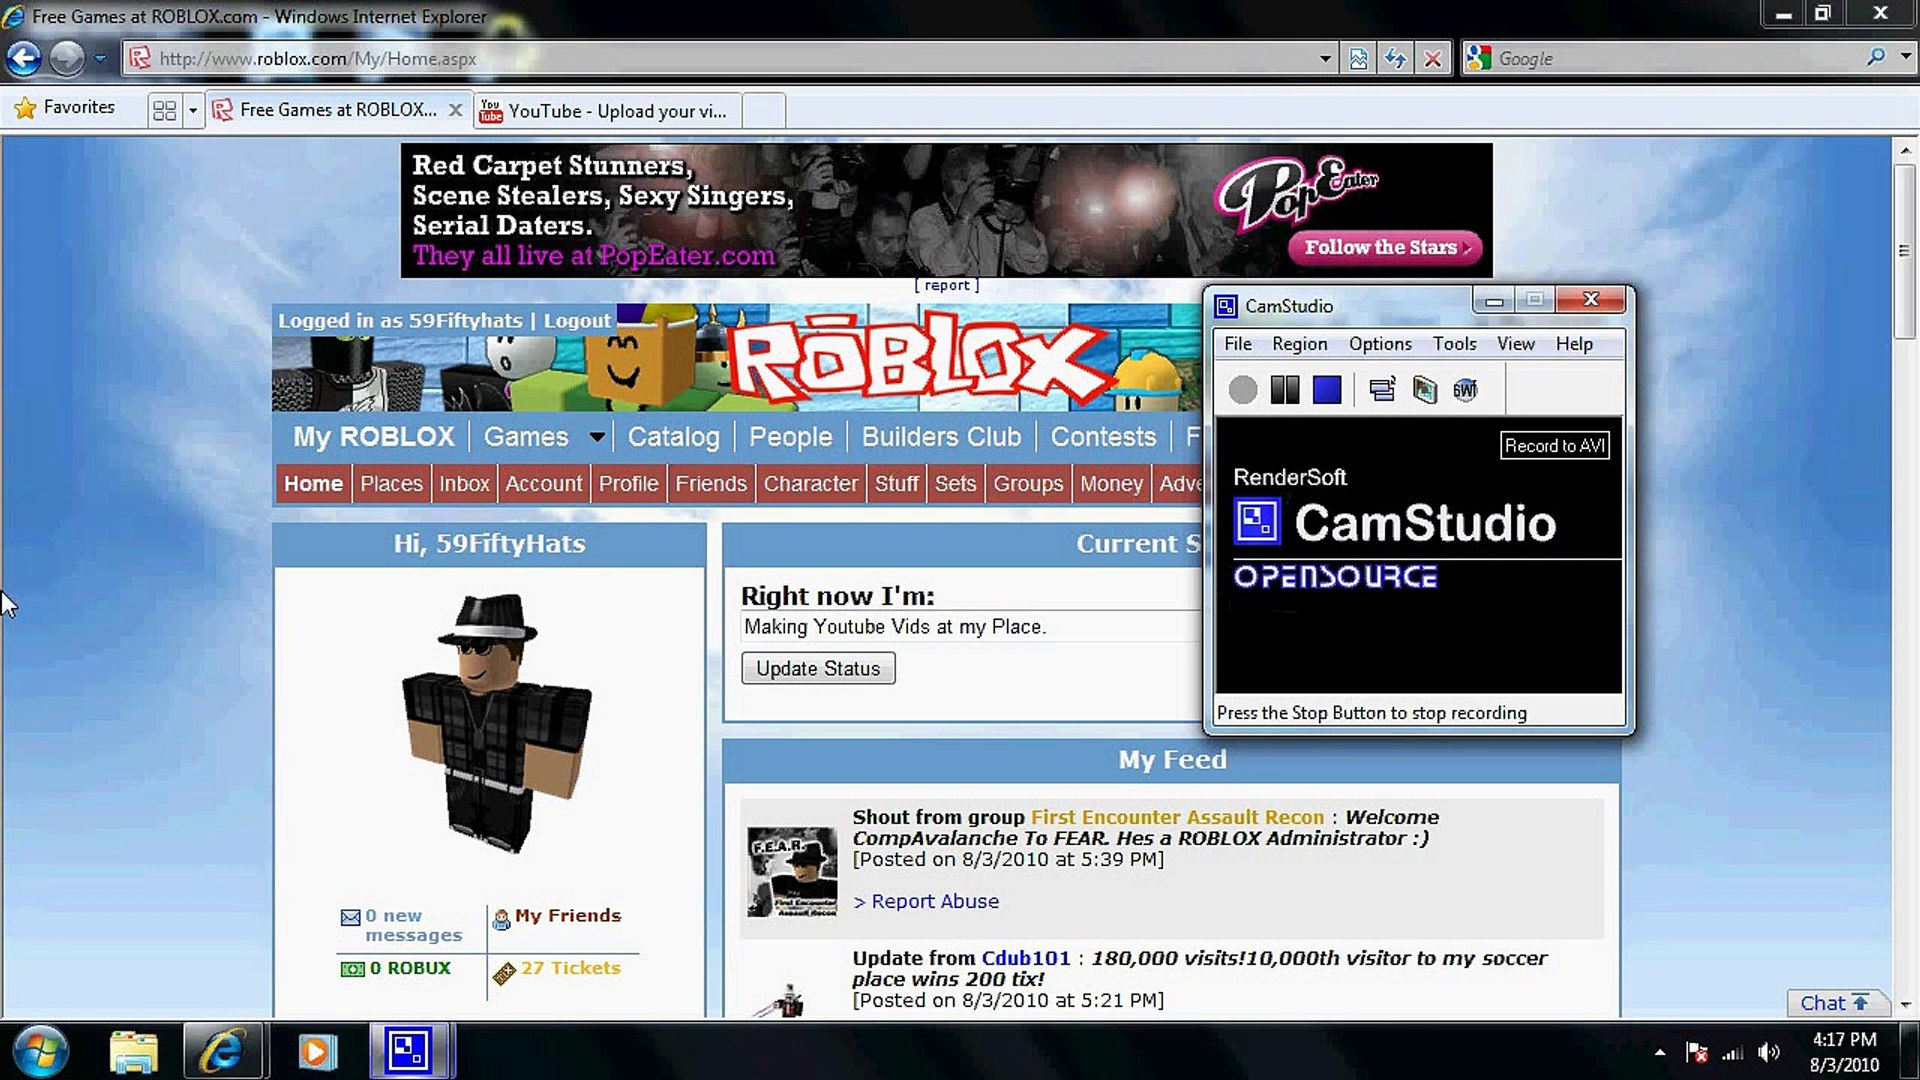 Roblox Robux Givers Site Risky Video Dailymotion - roblox robux givers site risky